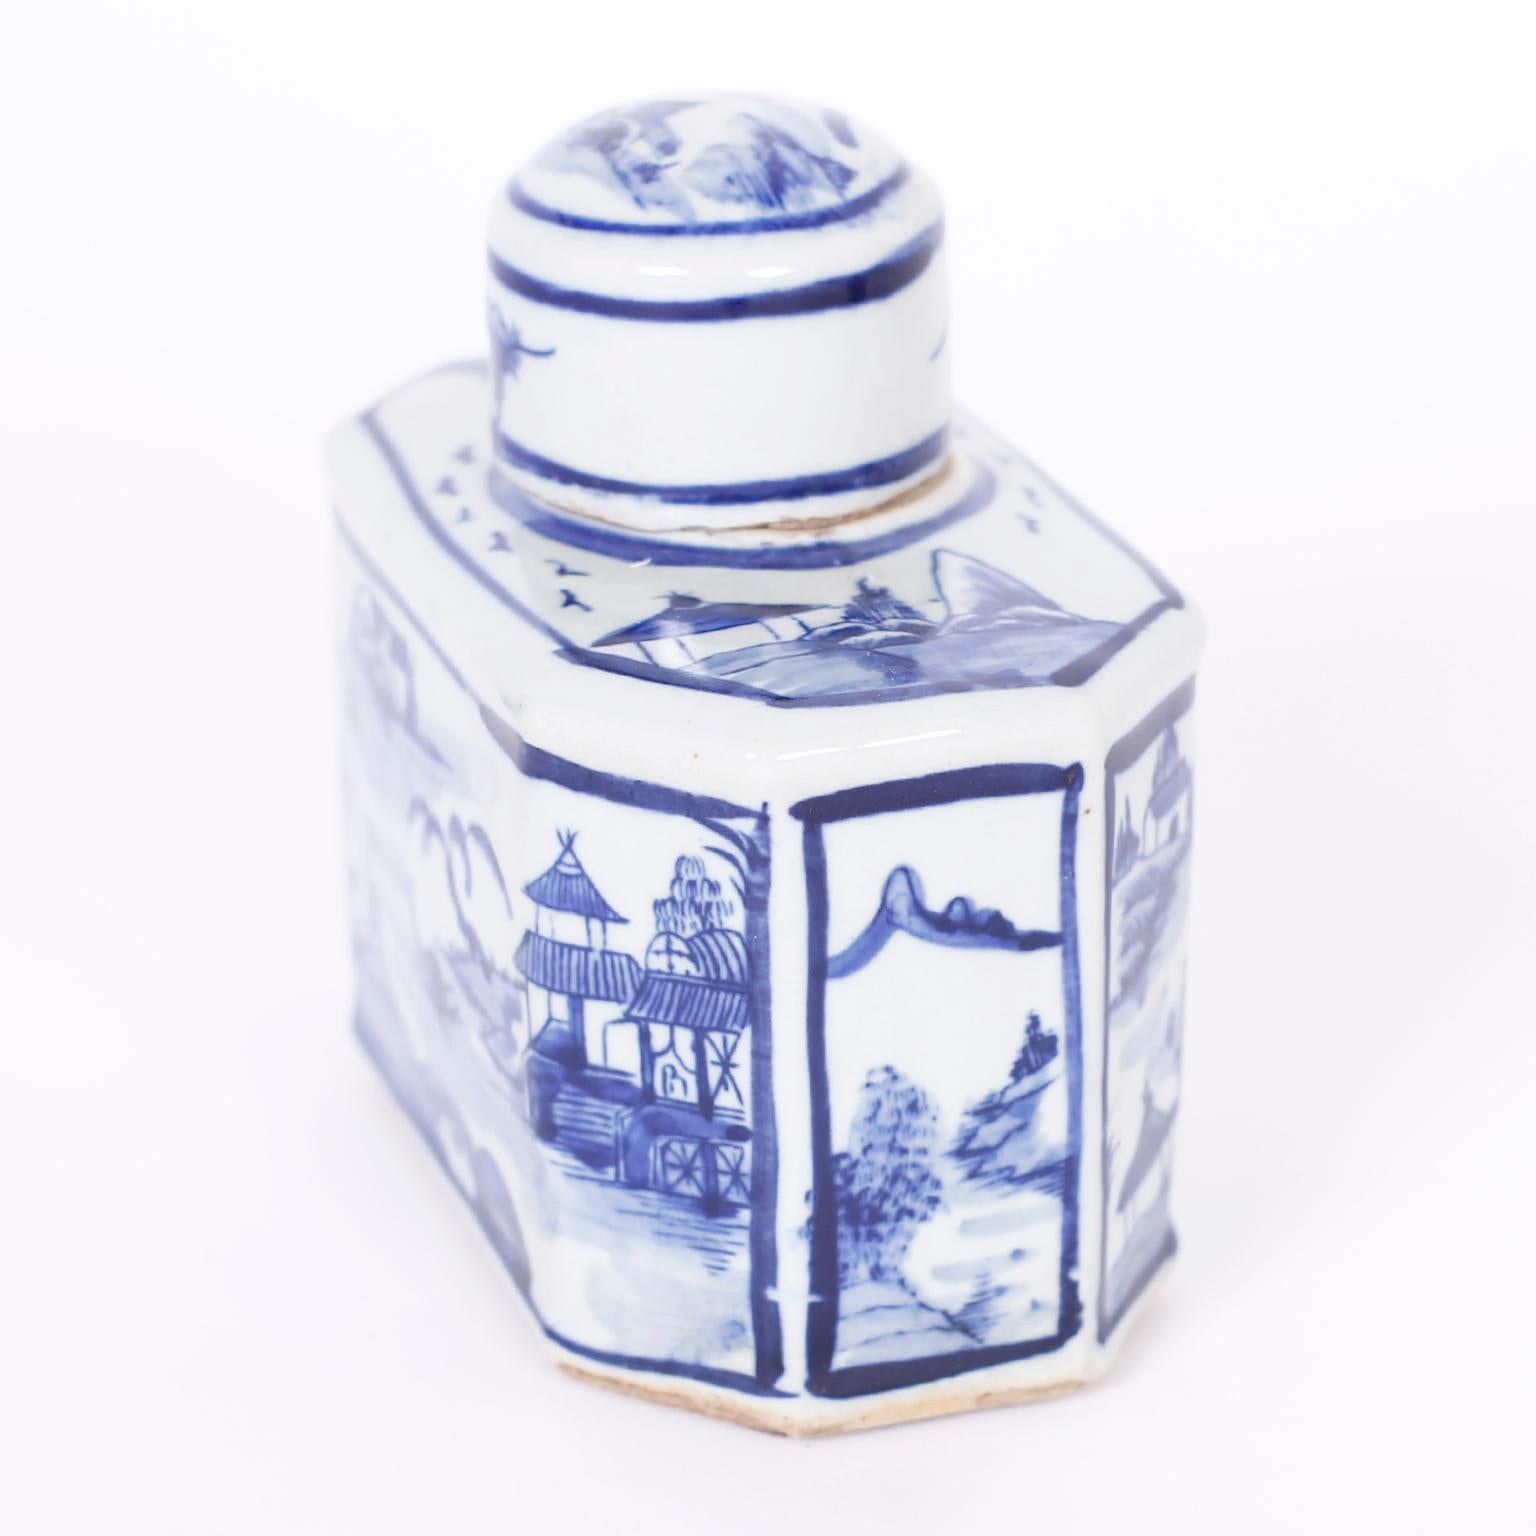 Contemporary Pair of Chinese Blue and White Porcelain Tea Caddies with Landscapes